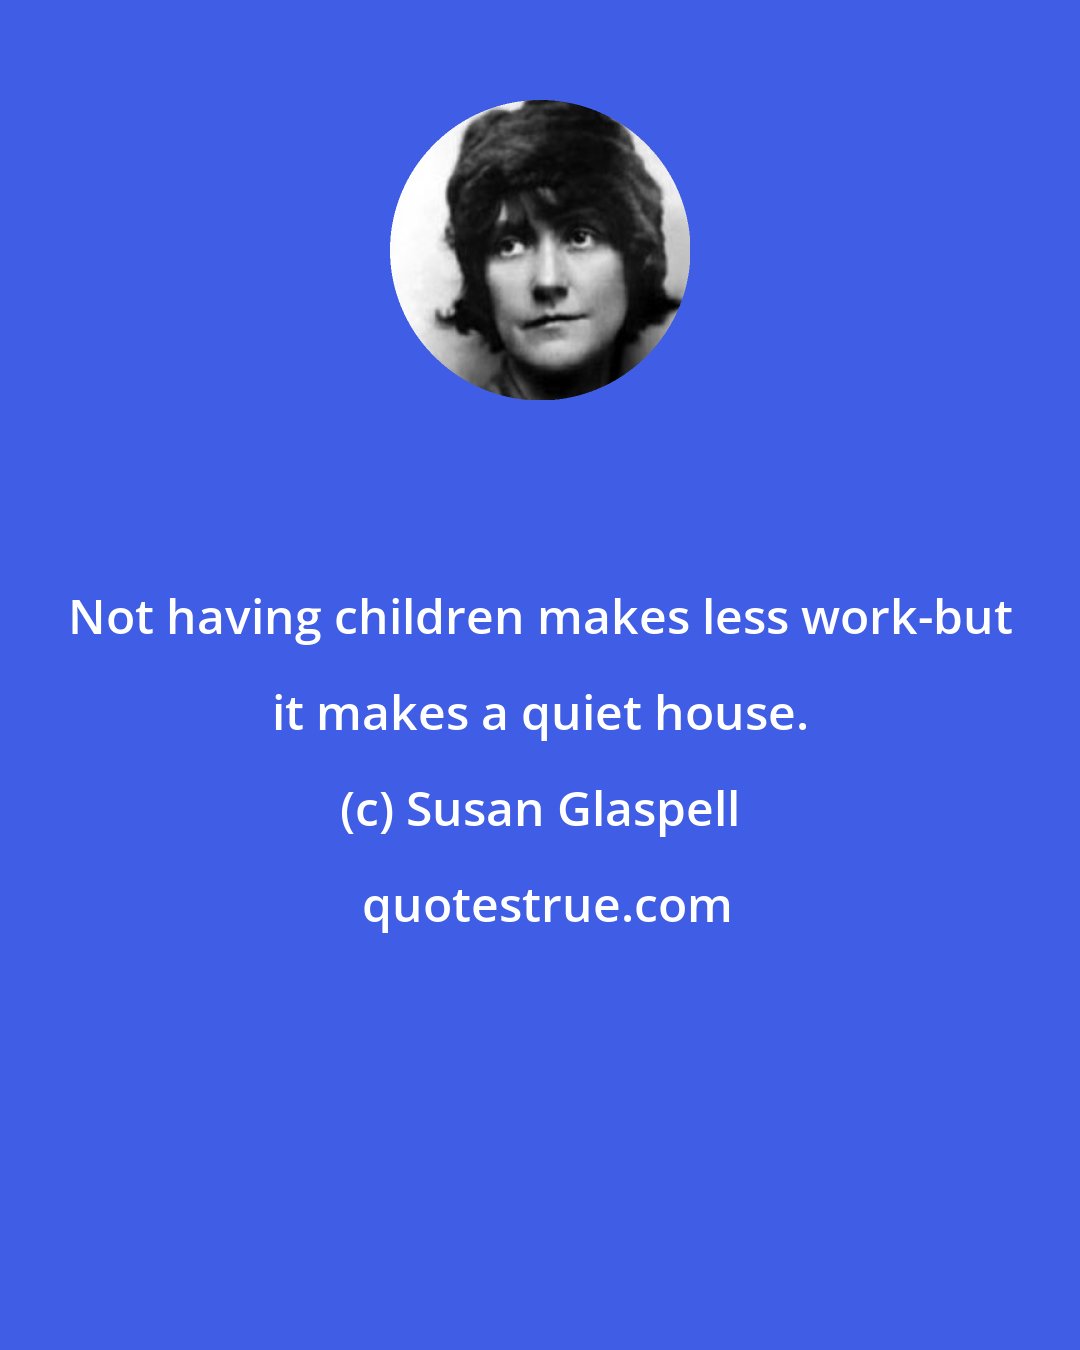 Susan Glaspell: Not having children makes less work-but it makes a quiet house.